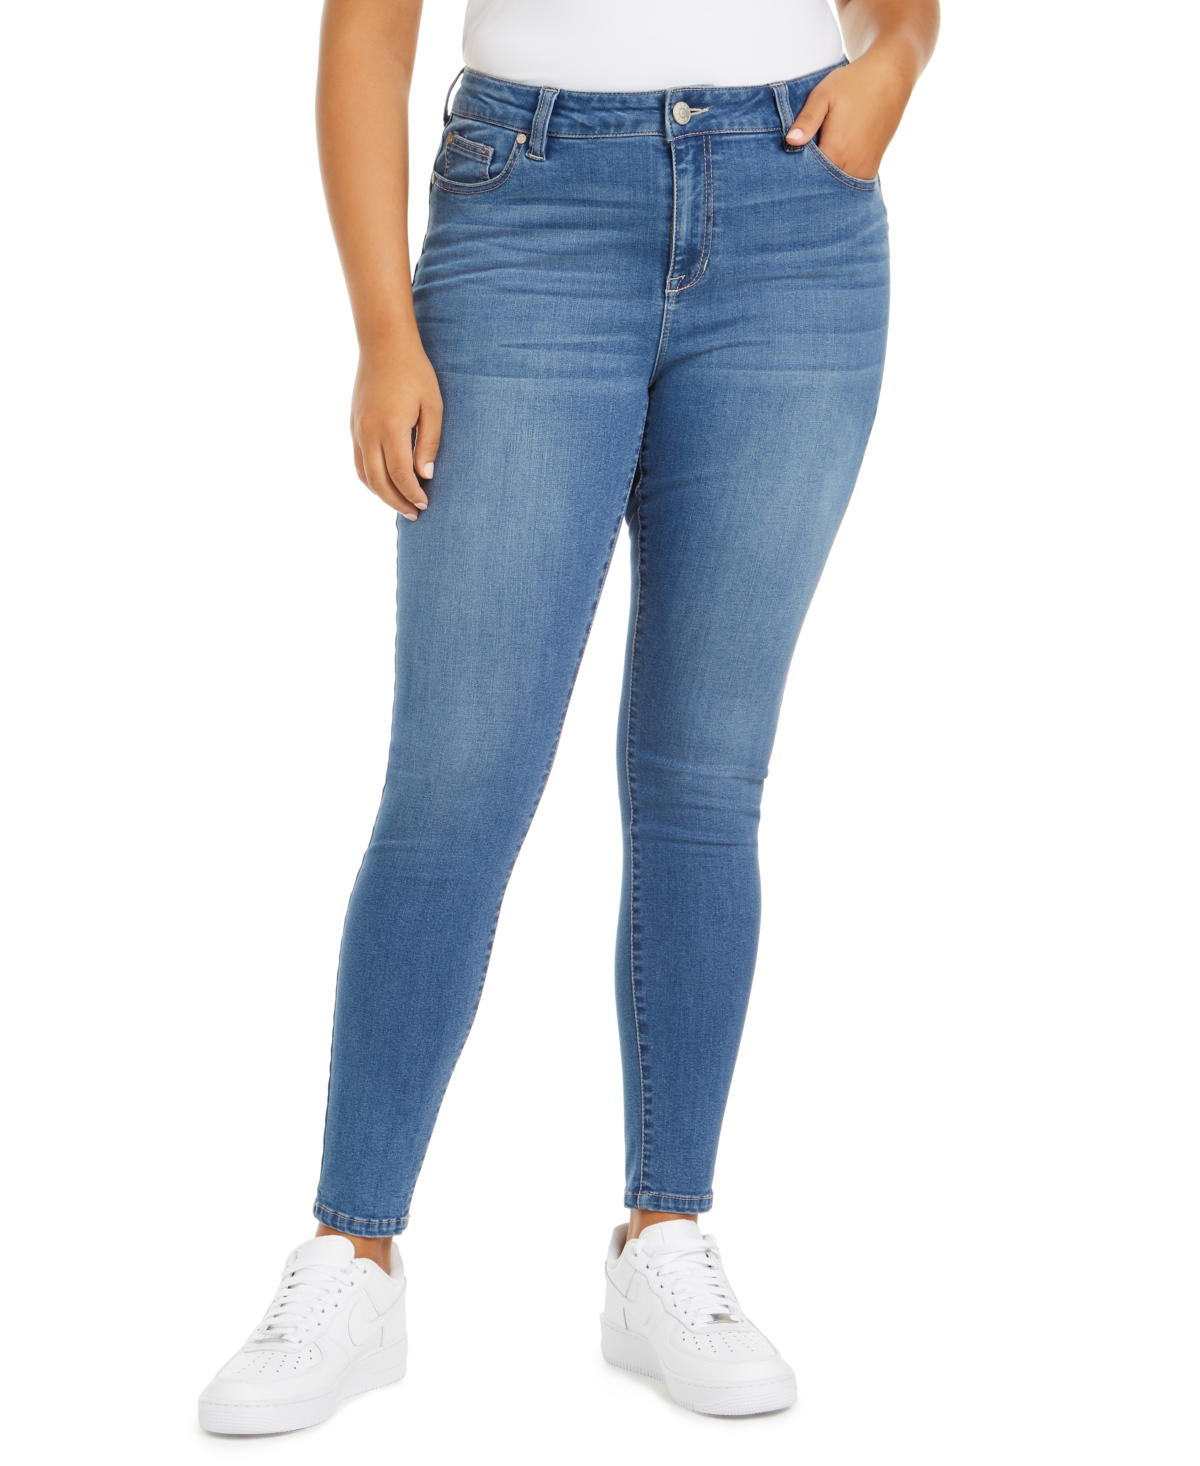 Shop Celebrity Pink Trendy Plus Size Sculpted Skinny Jeans In Amaze